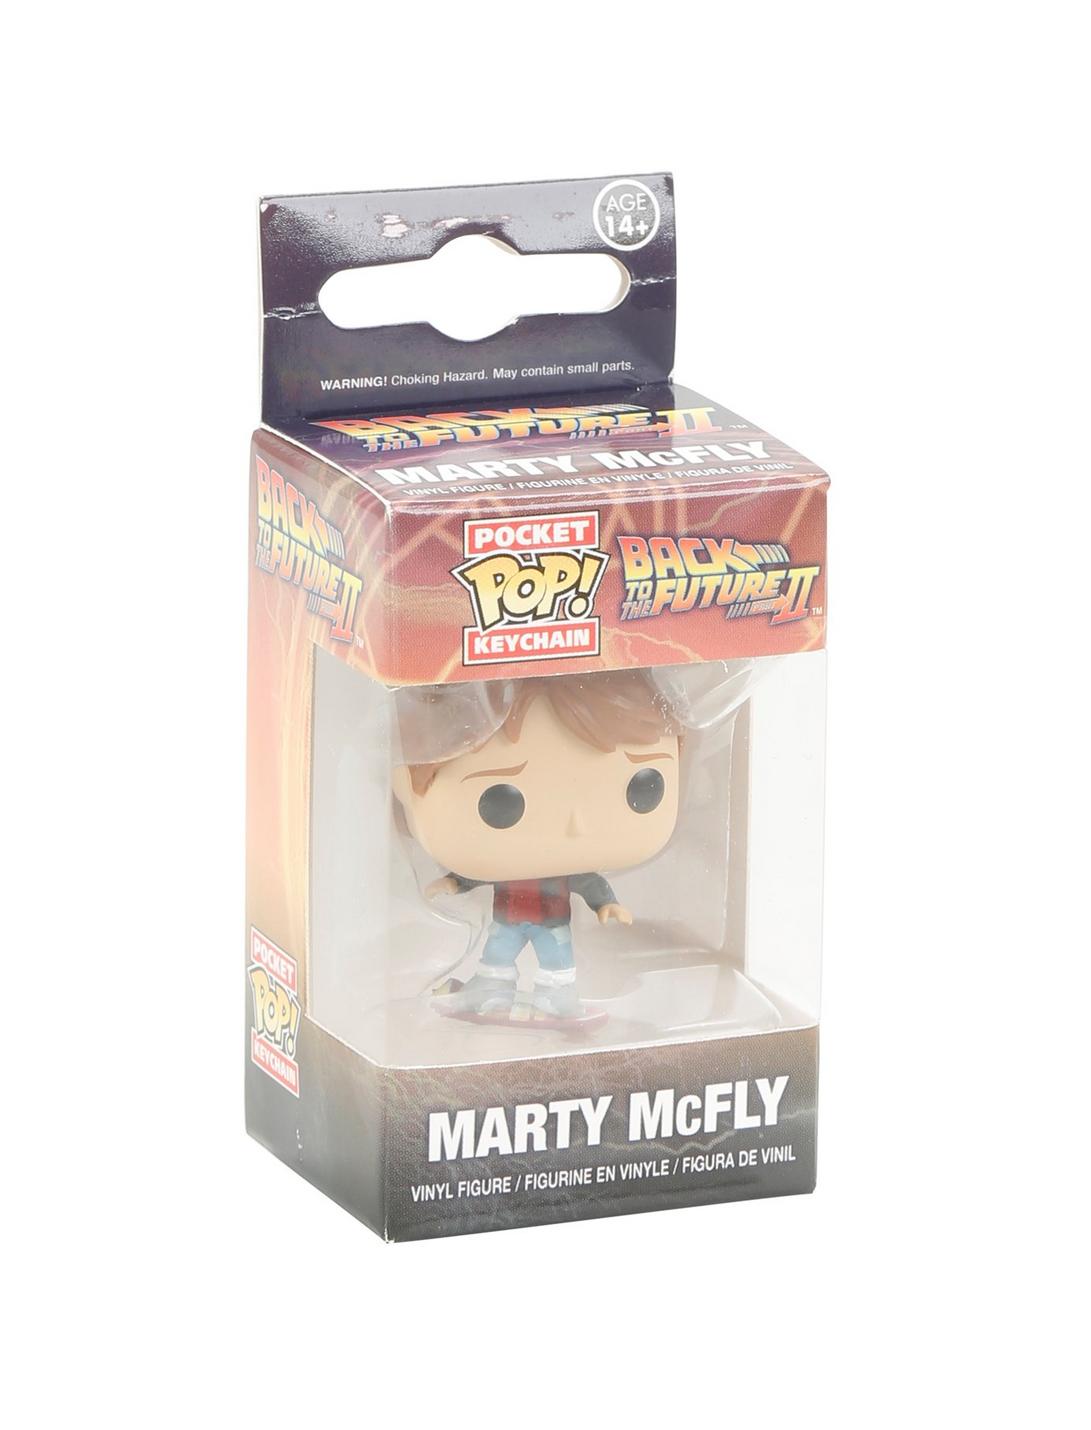 Funko Back To The Future Part II Pocket Pop! Marty McFly Key Chain, , hi-res